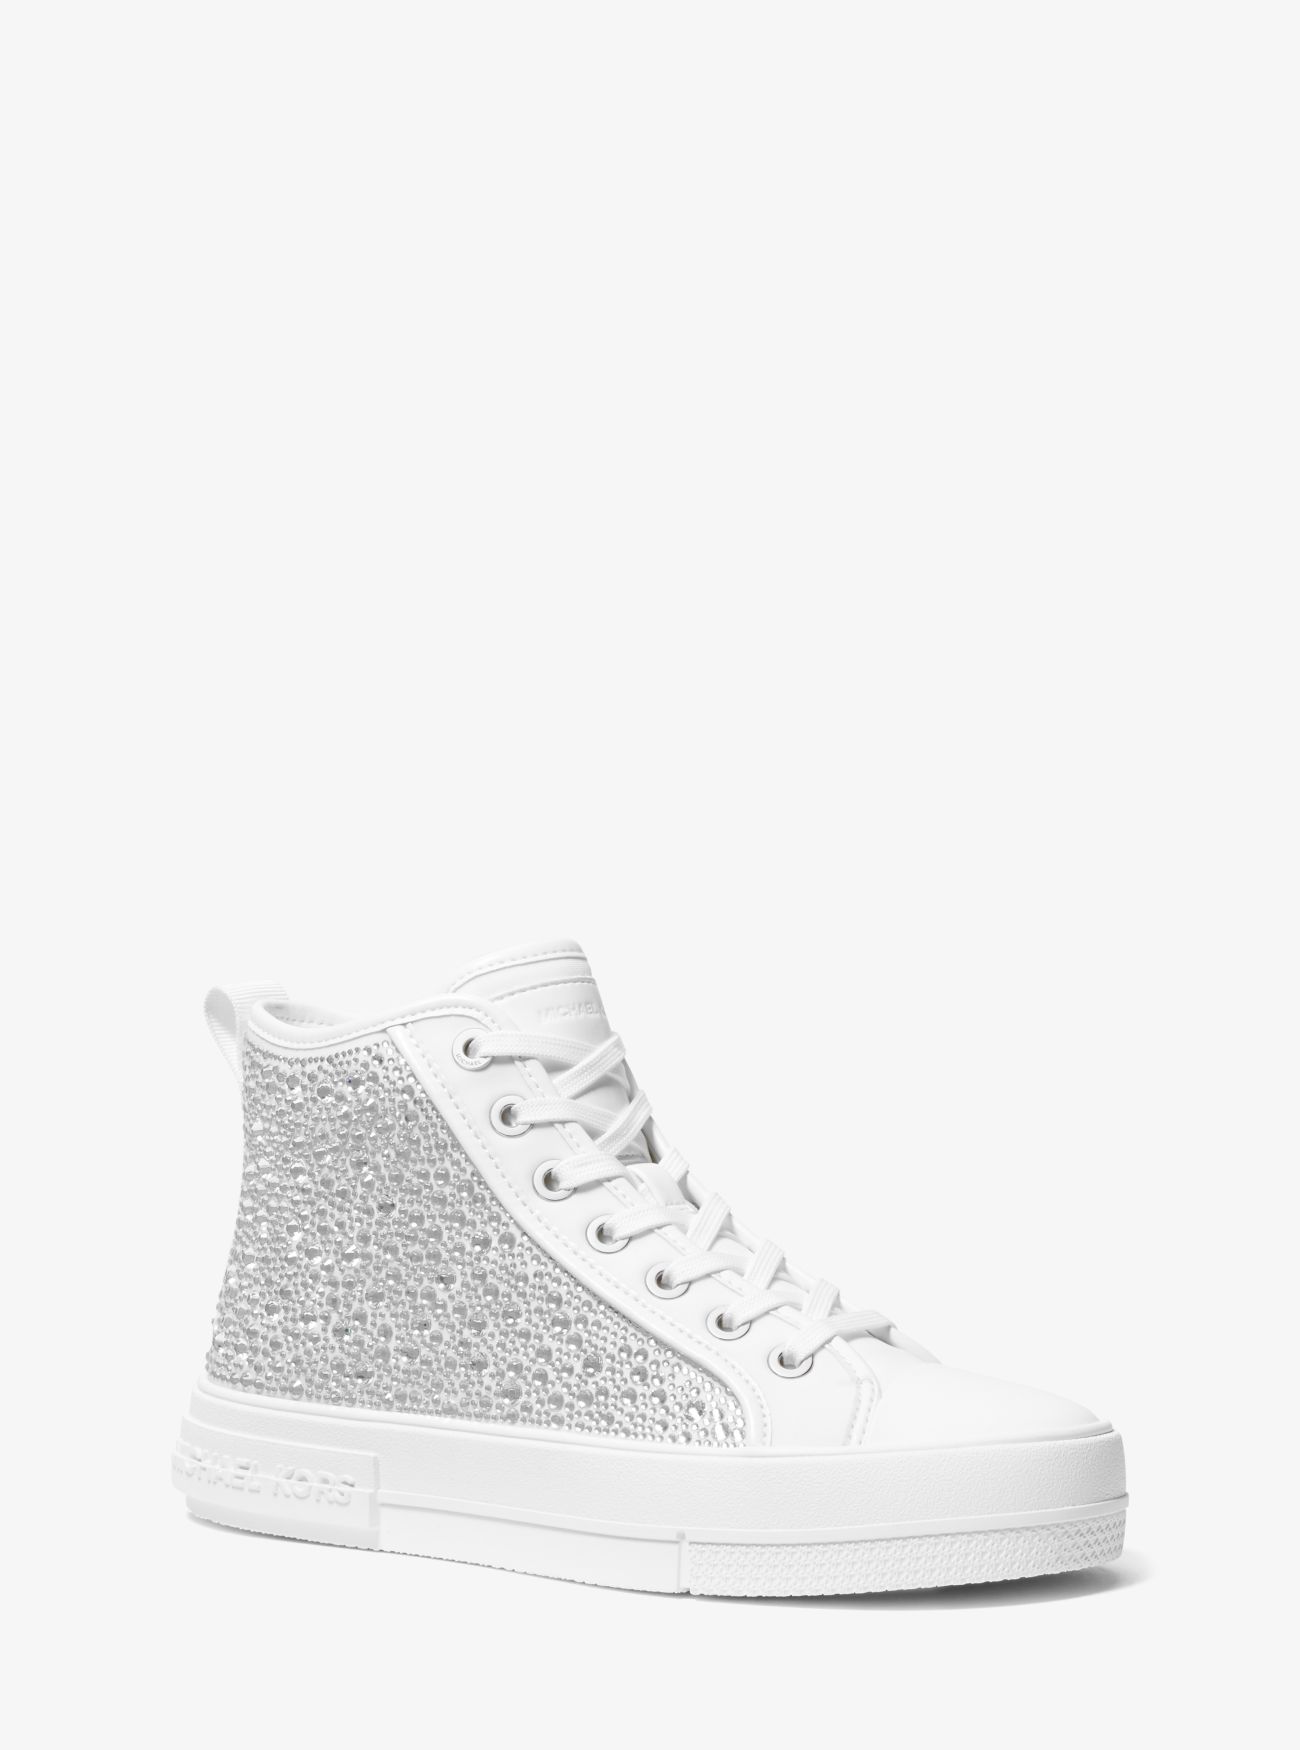 MK Evy Embellished Scuba High-Top Trainers - White - Michael Kors